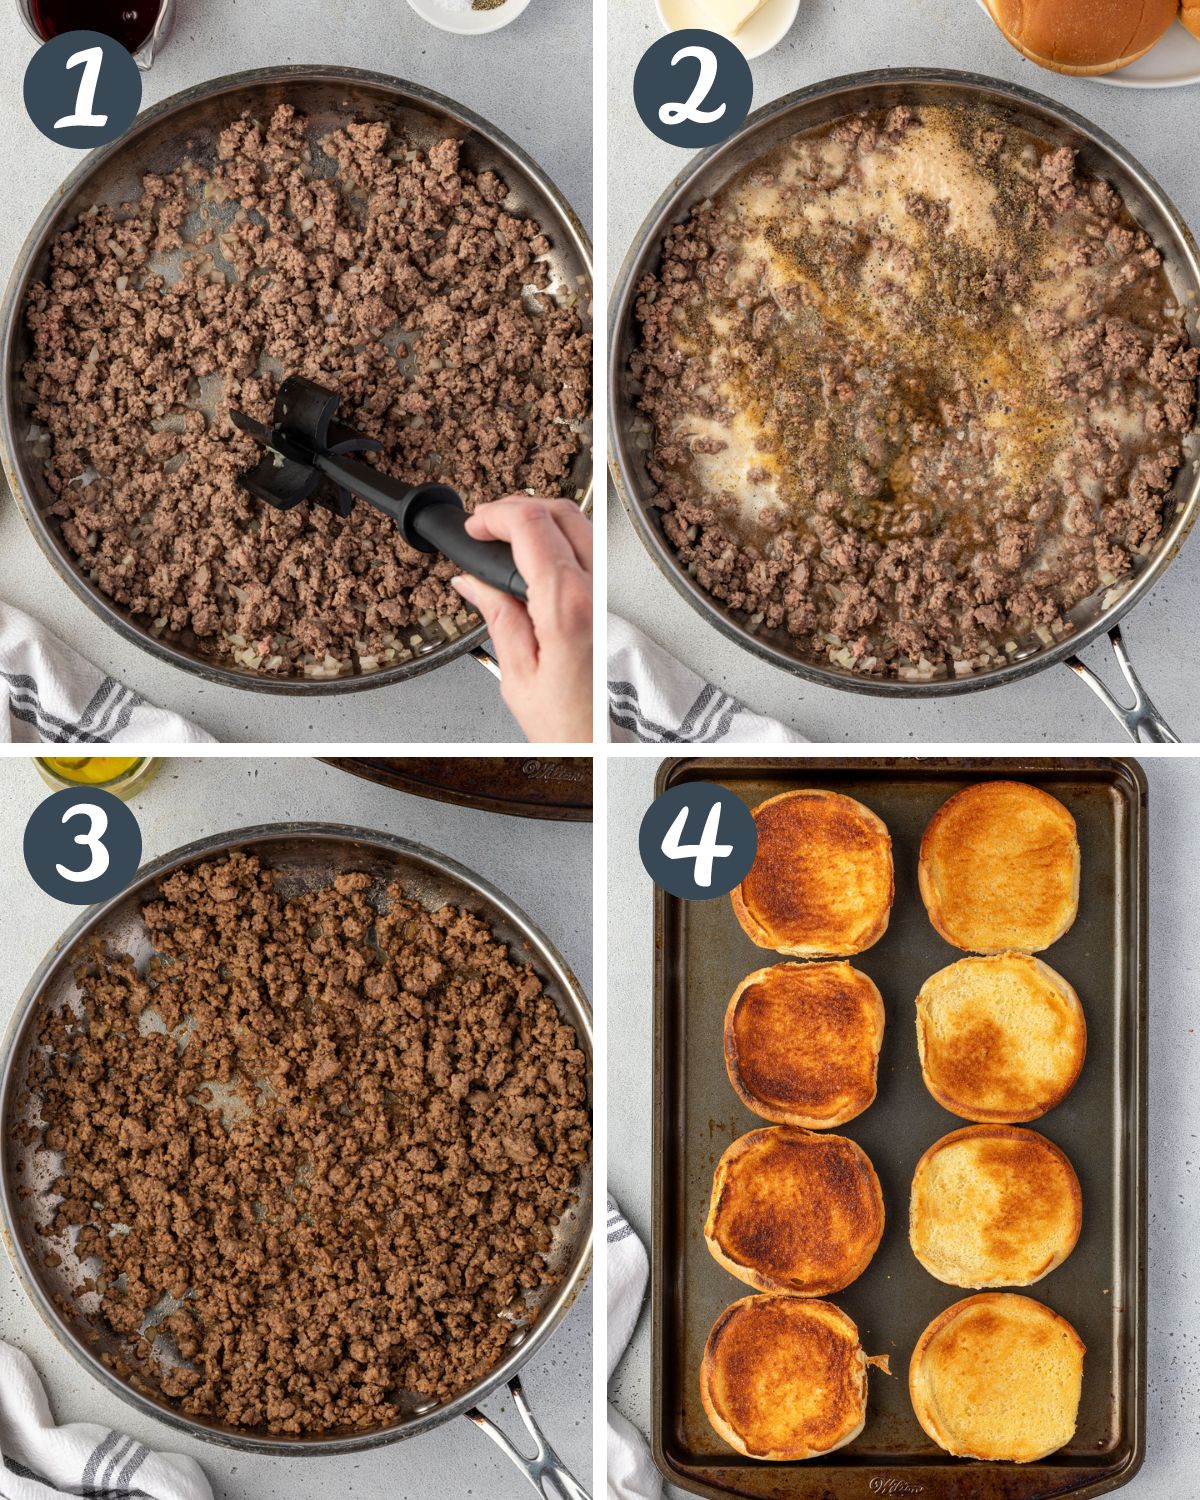 4 images showing the steps to make the sandwich, including toasting buns.